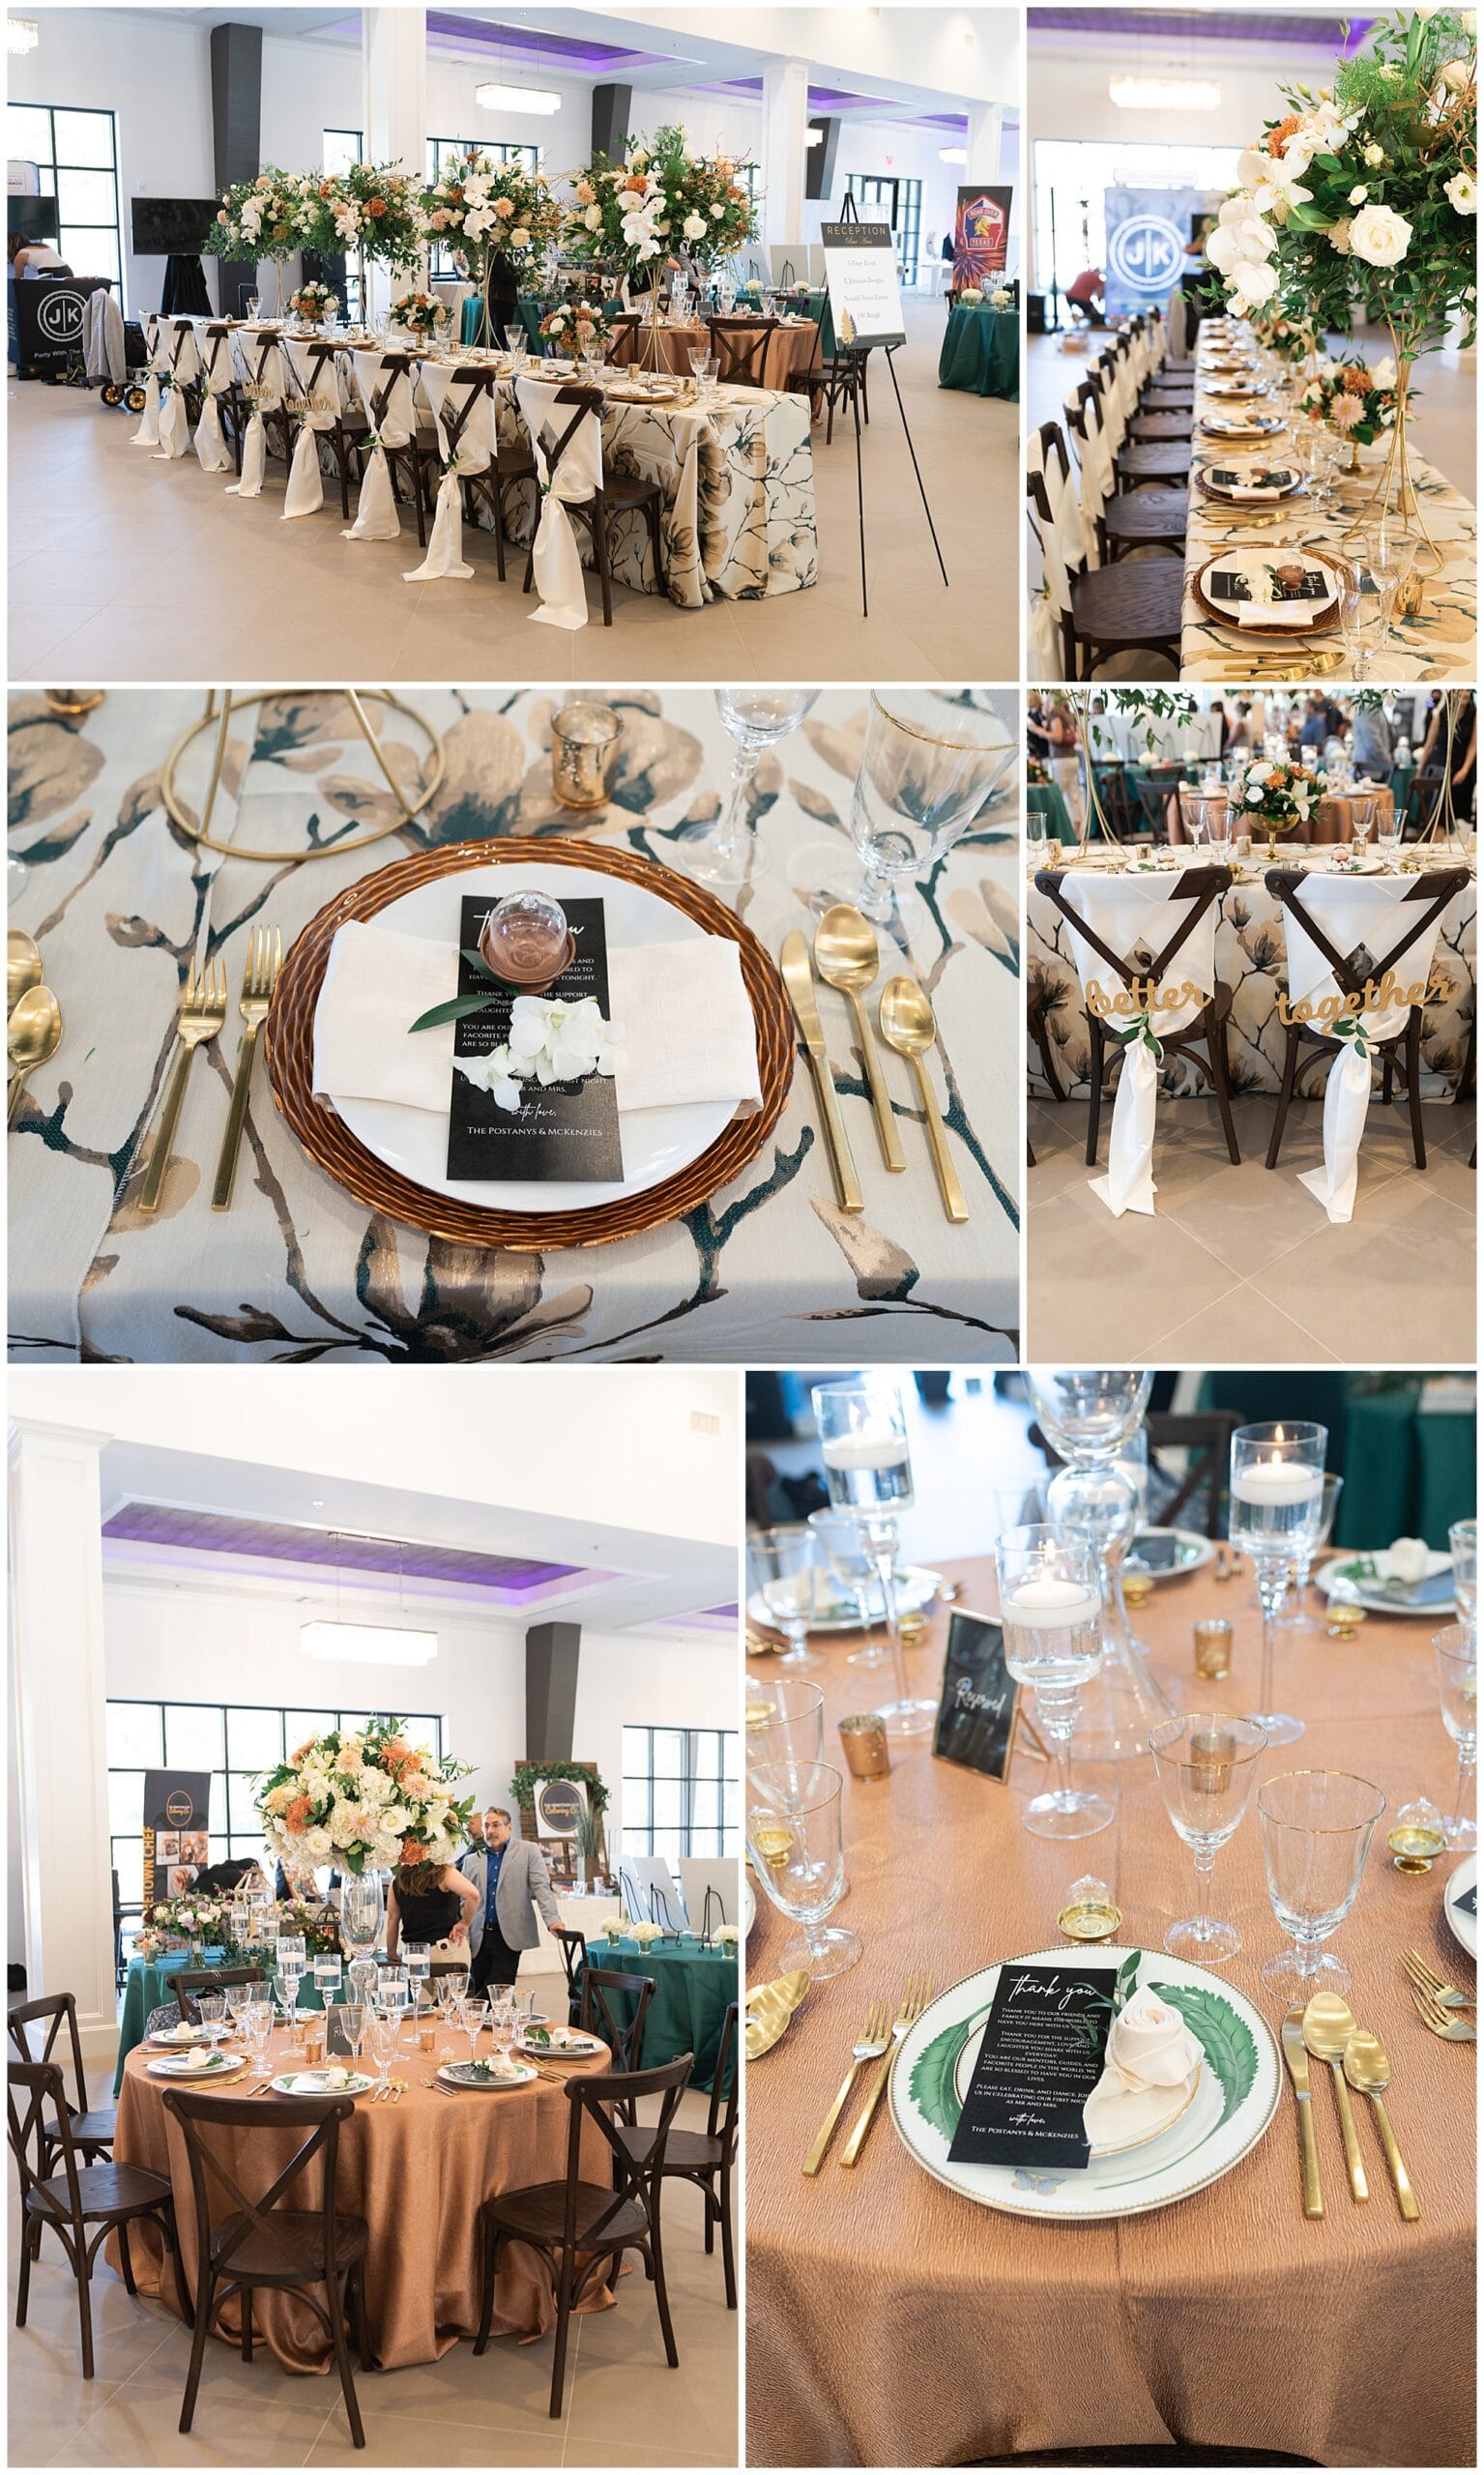 Houston wedding venue at their open house table setting for a wedding reception captured by Swish and Click Photography